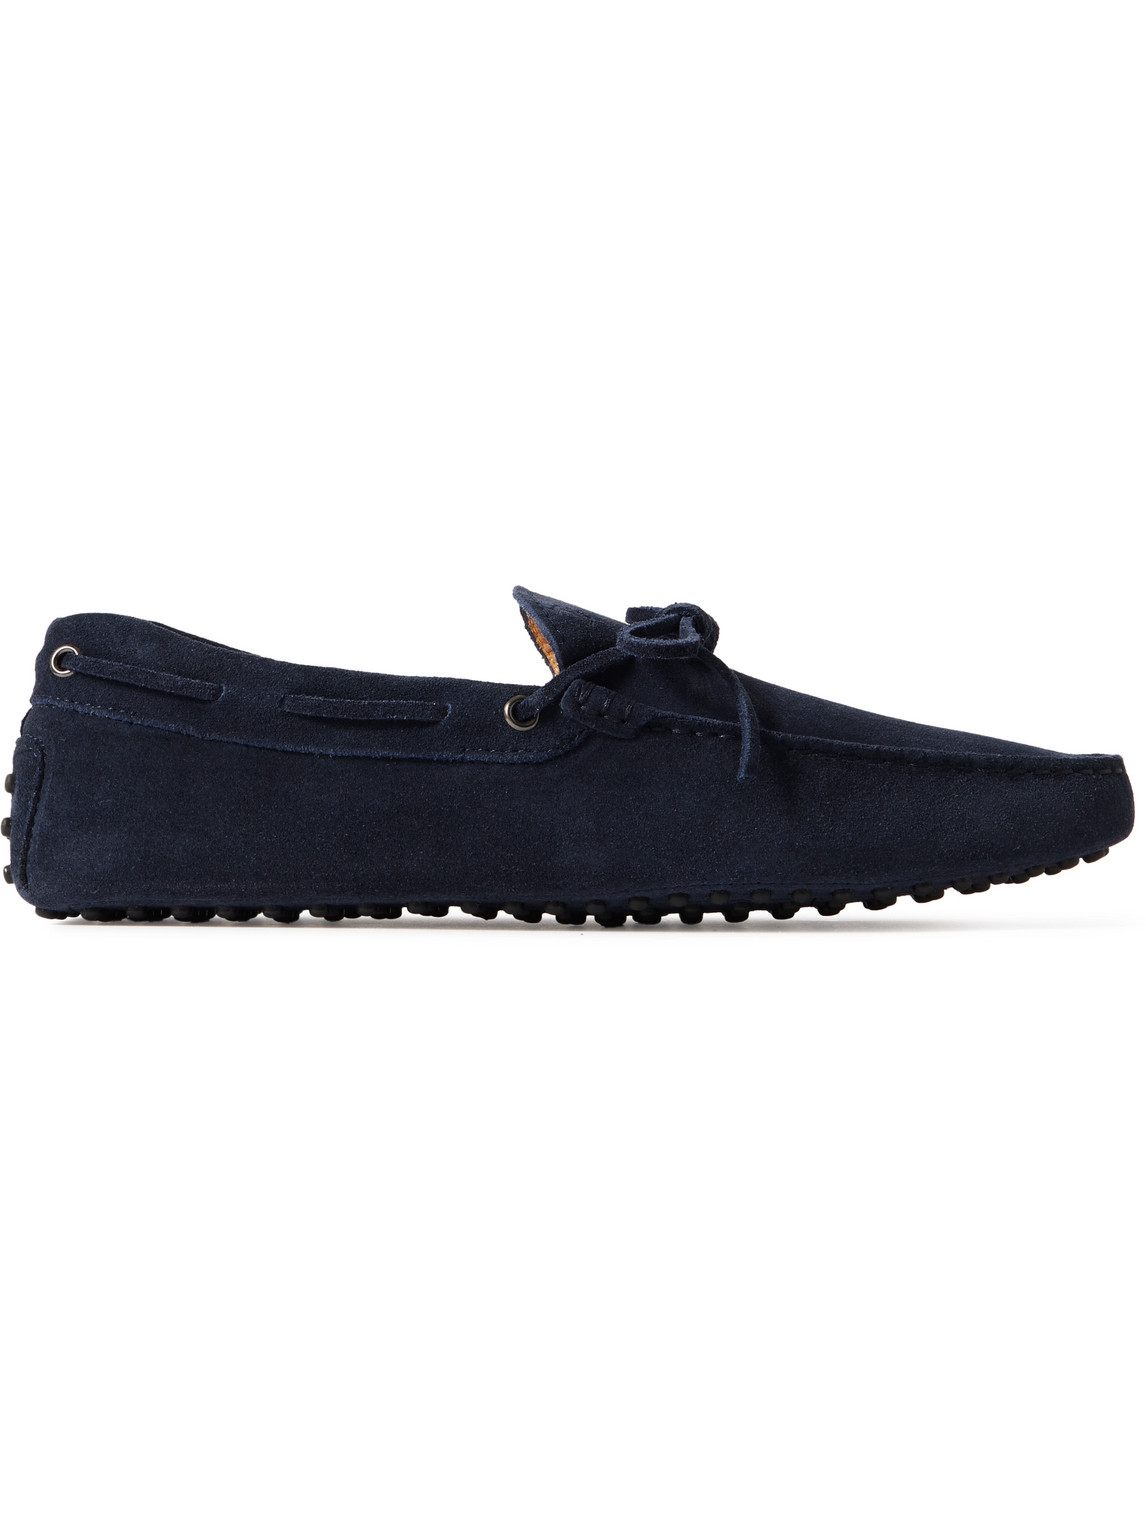 Tod's - Gommino Suede Driving Shoes - Men - Blue - UK 7 von Tod's